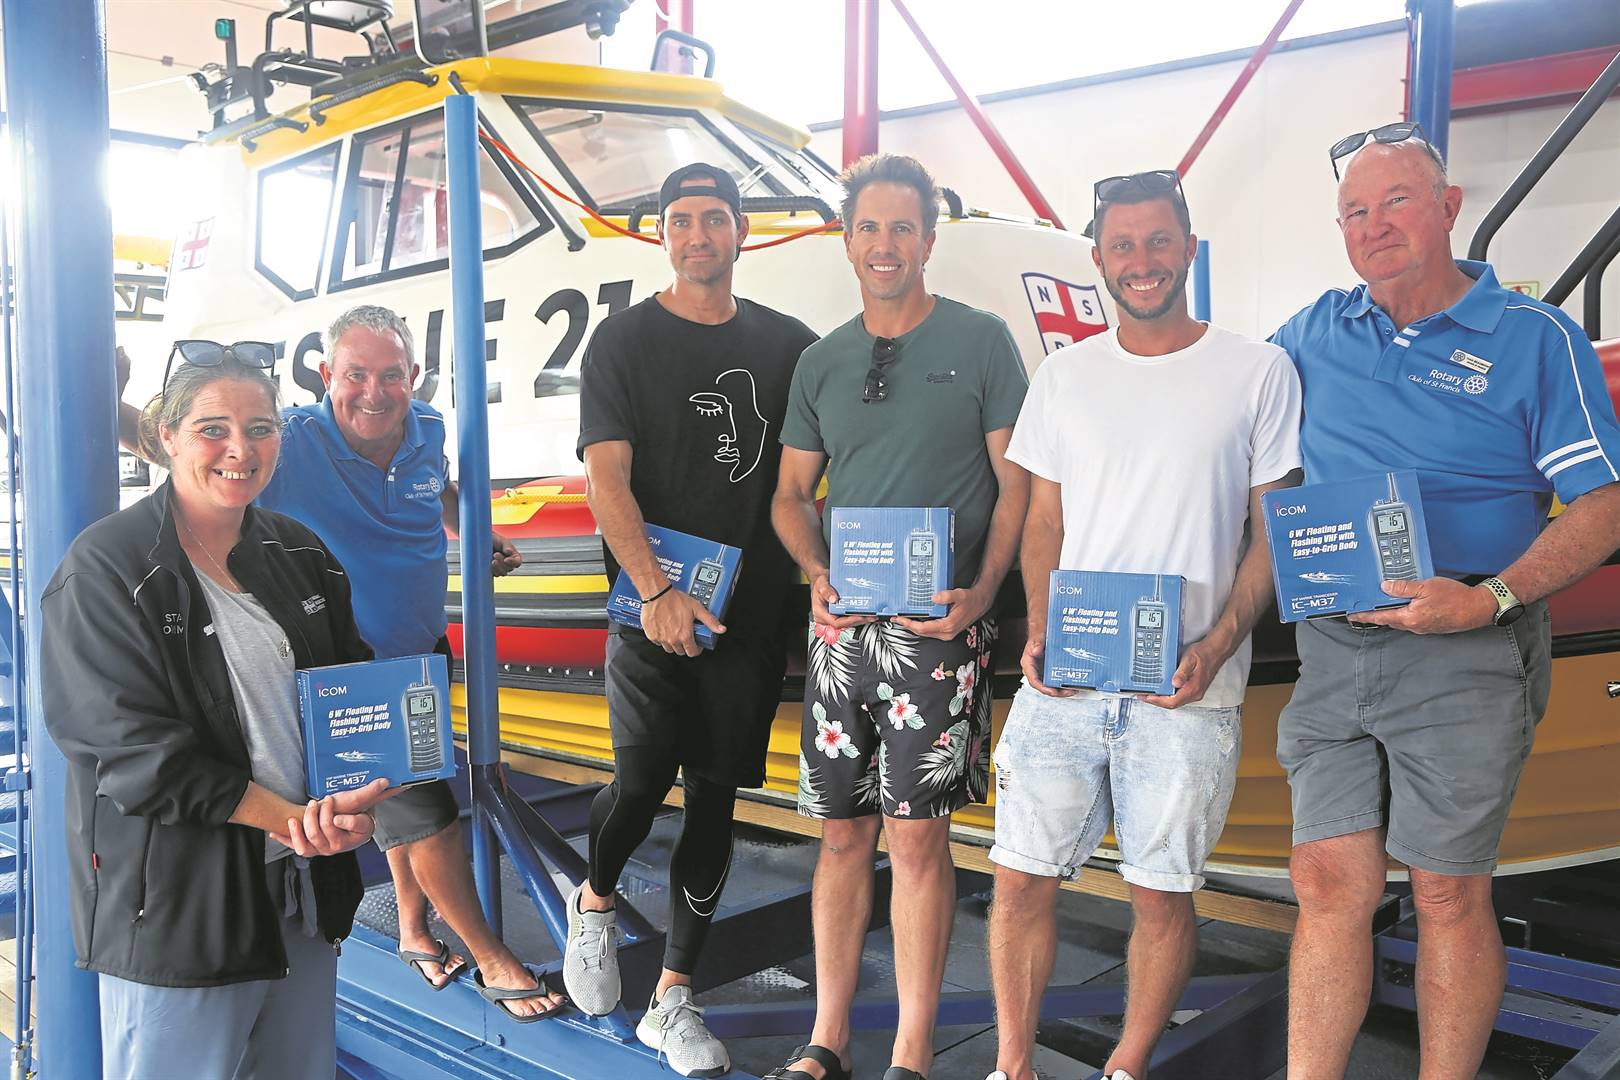 From left are Sara Smith (St Francis Bay station commander), Andrew Watson (St Francis Bay Rotary), Ryan Christie (co-founder of Billy's Beach), Warren Adler (Billy’s Beach financial head and co-organiser of Billy’s Beach Charity Party), Shaun Payne (co-founder of Billy's Beach) and Ivan Beaumont (St Francis Bay Rotary).                                                                Photo: SUPPLIED